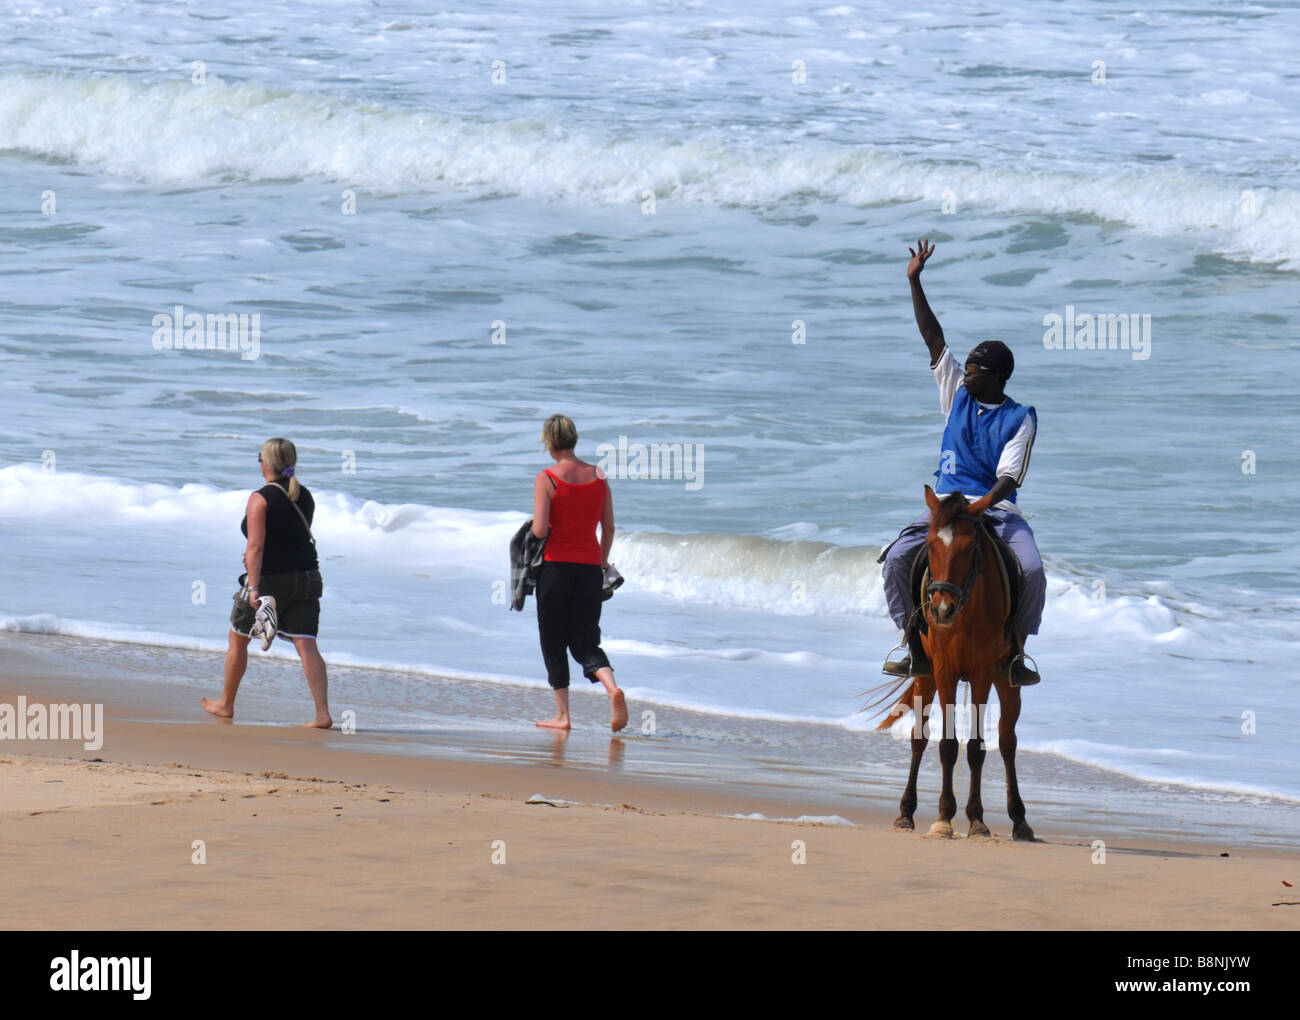 Local man on horseback waves to female tourists on the beach, The Gambia, “West Africa” Stock Photo